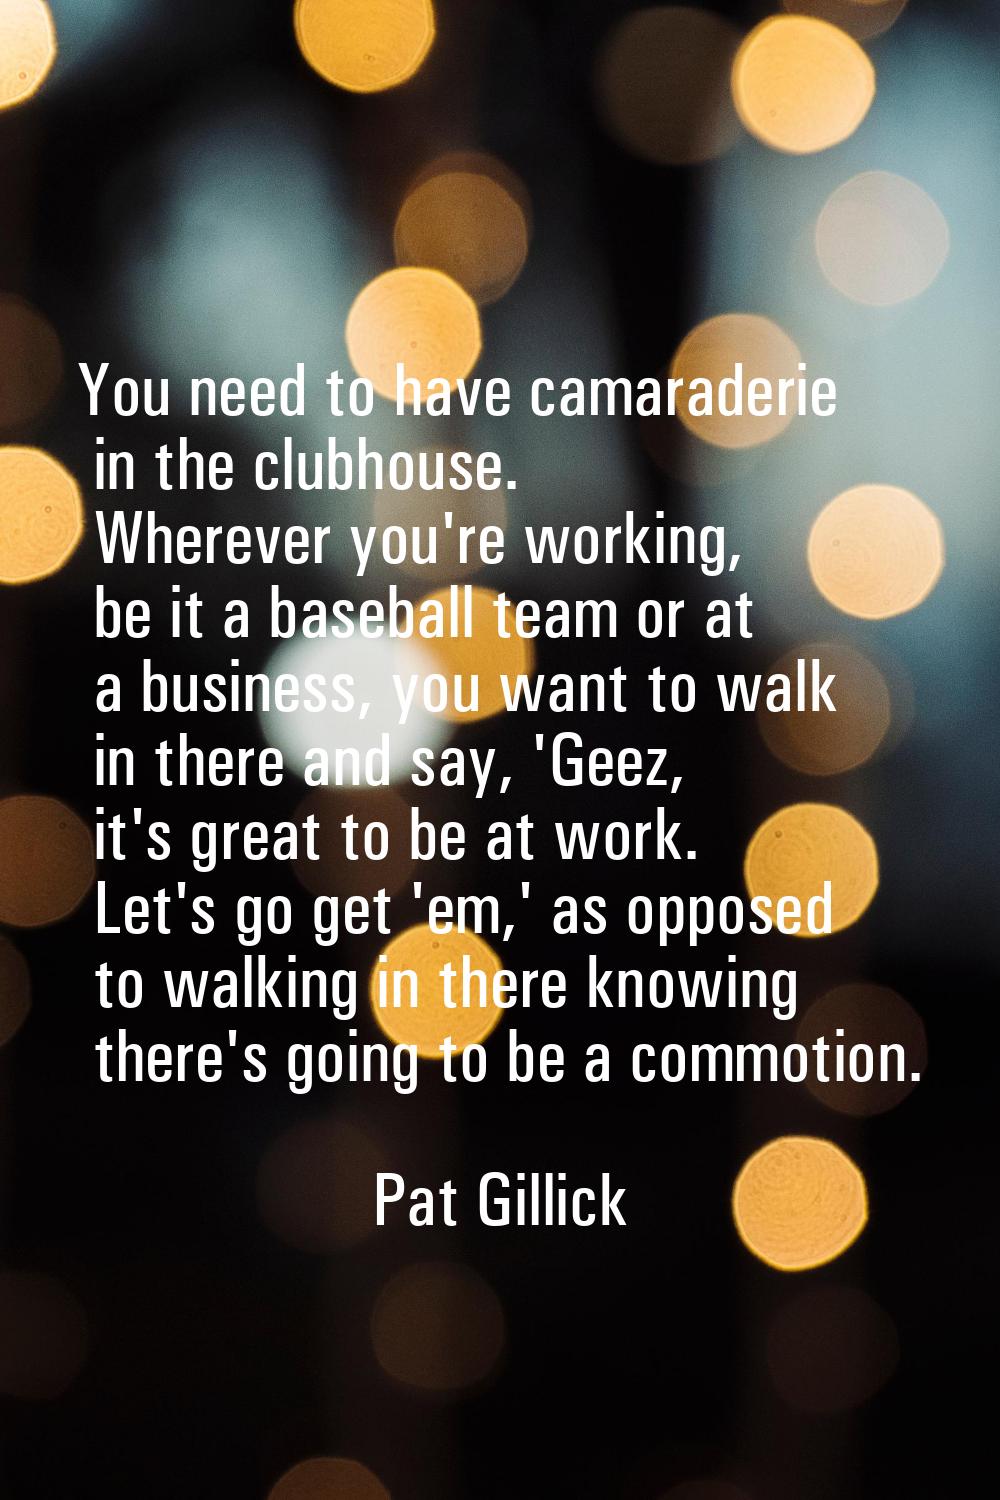 You need to have camaraderie in the clubhouse. Wherever you're working, be it a baseball team or at